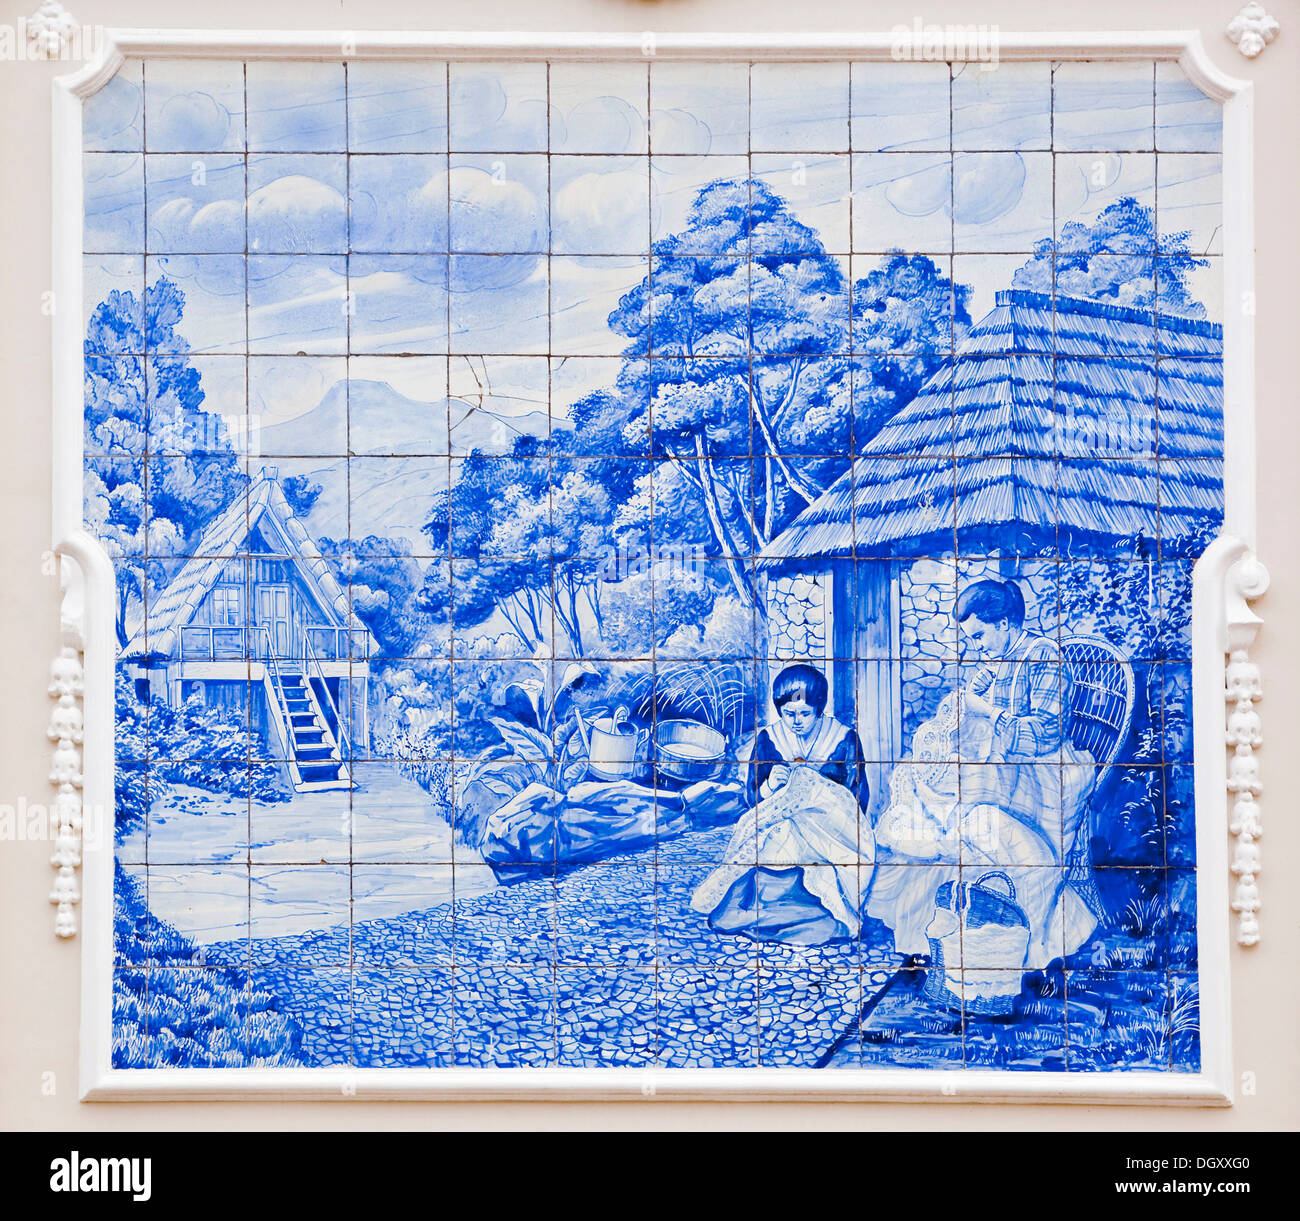 Azulejo, mural made of painted ceramic tiles, rural scene, two women sewing and stitching, on the local theatre in Funchal Stock Photo